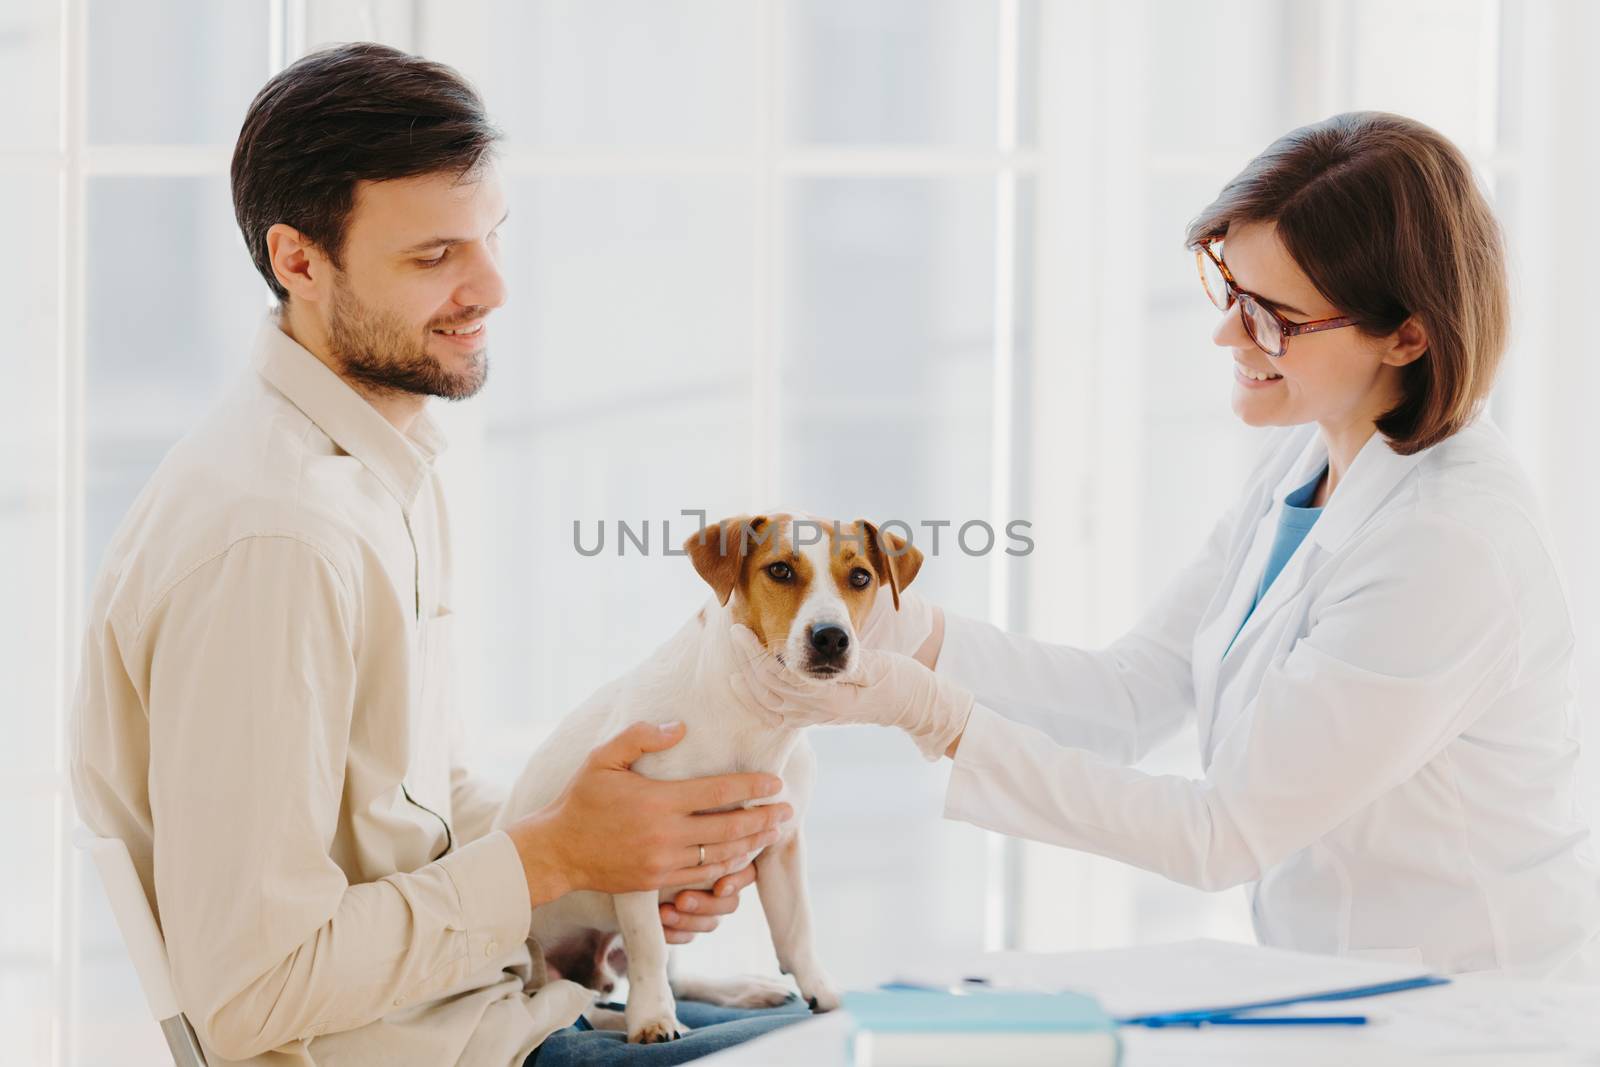 Young veteranian woman examines jack russel terrier dog, works in animal clinic, talks with male owner, pose indoor. Pedigree dog examined by professional vet. Medical examination for animals